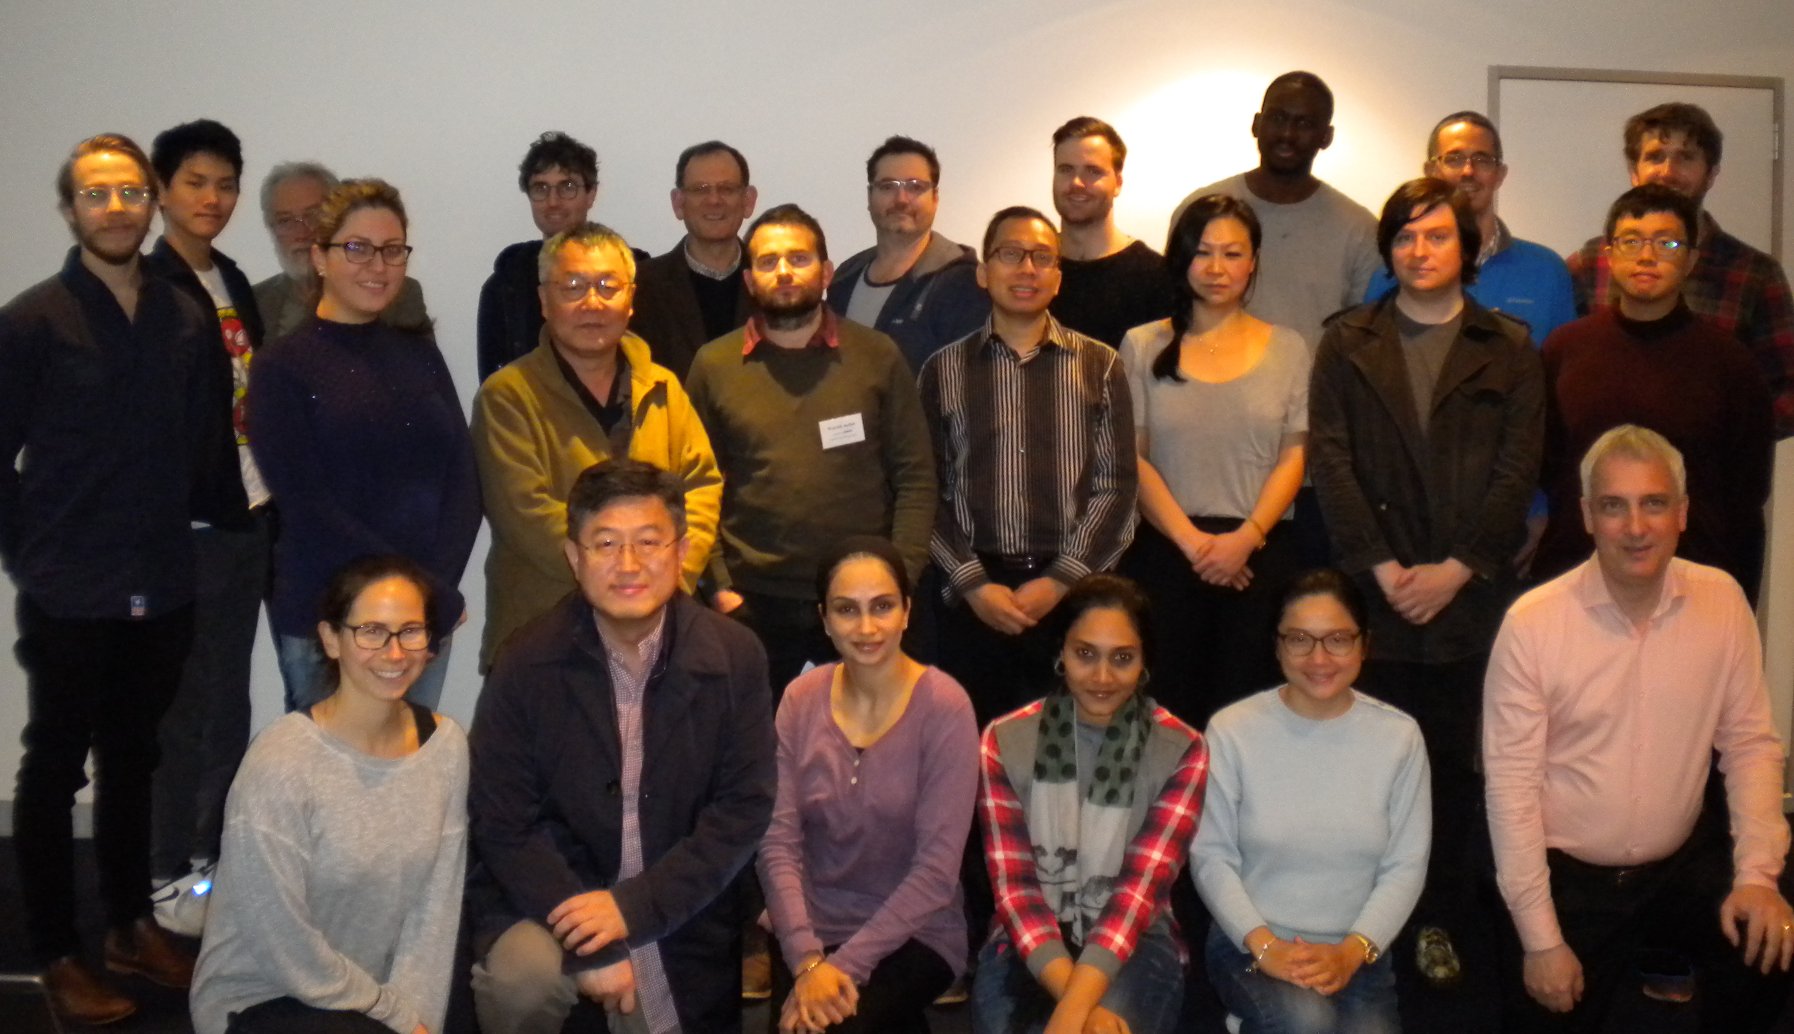 July 2018 Practical CGE course held at Victoria University, Melbourne